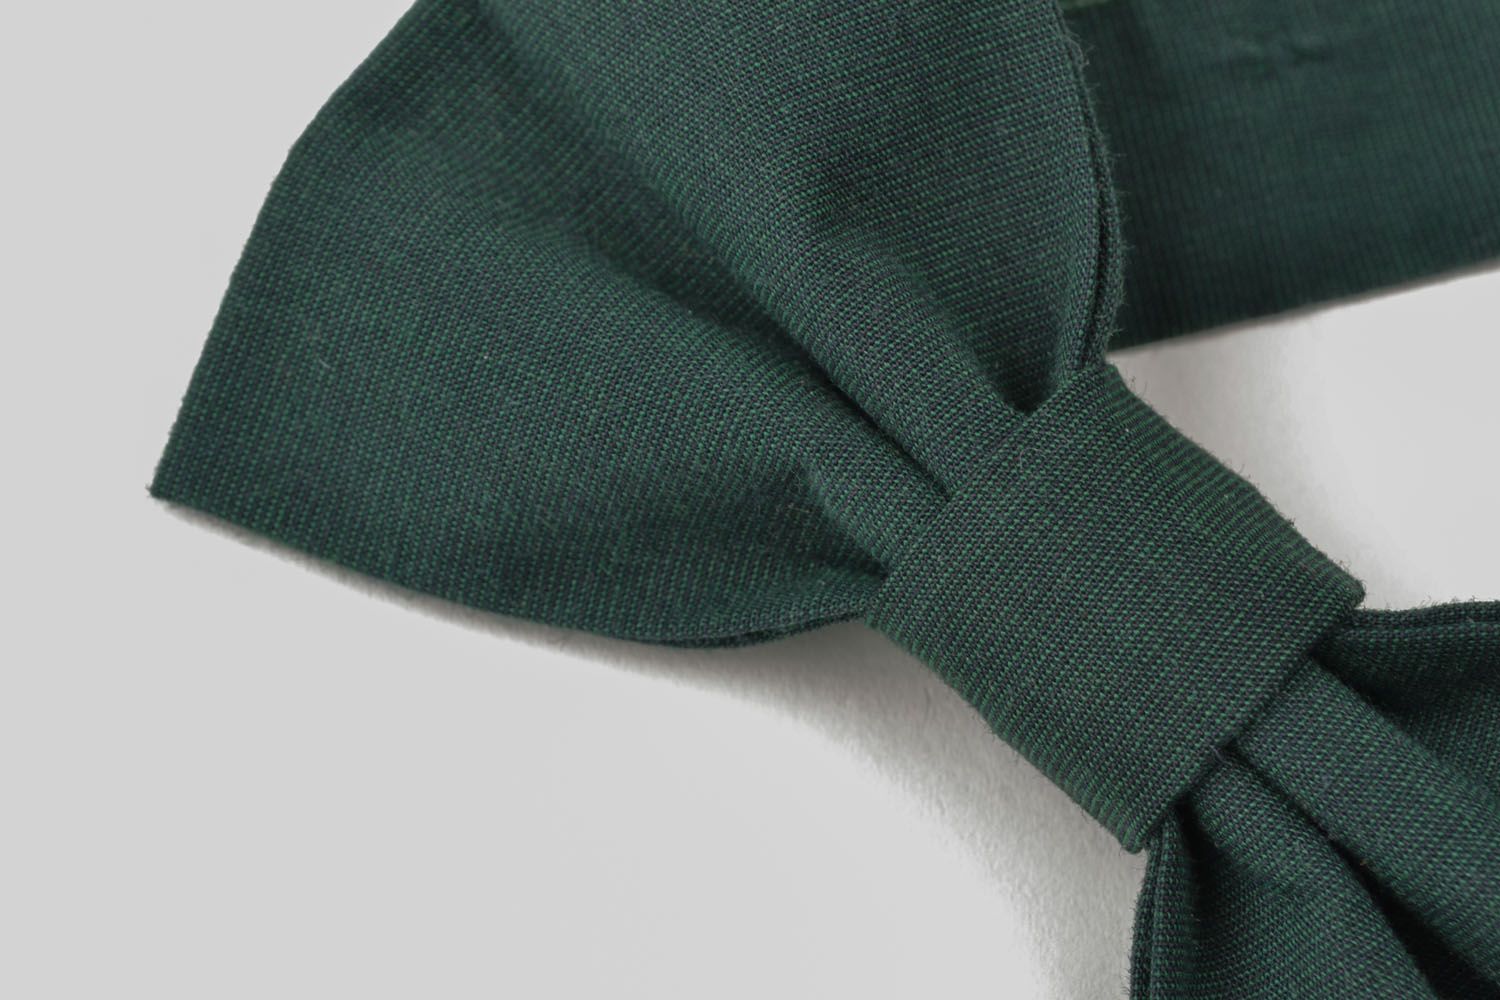 Classic grey and green bow tie photo 5